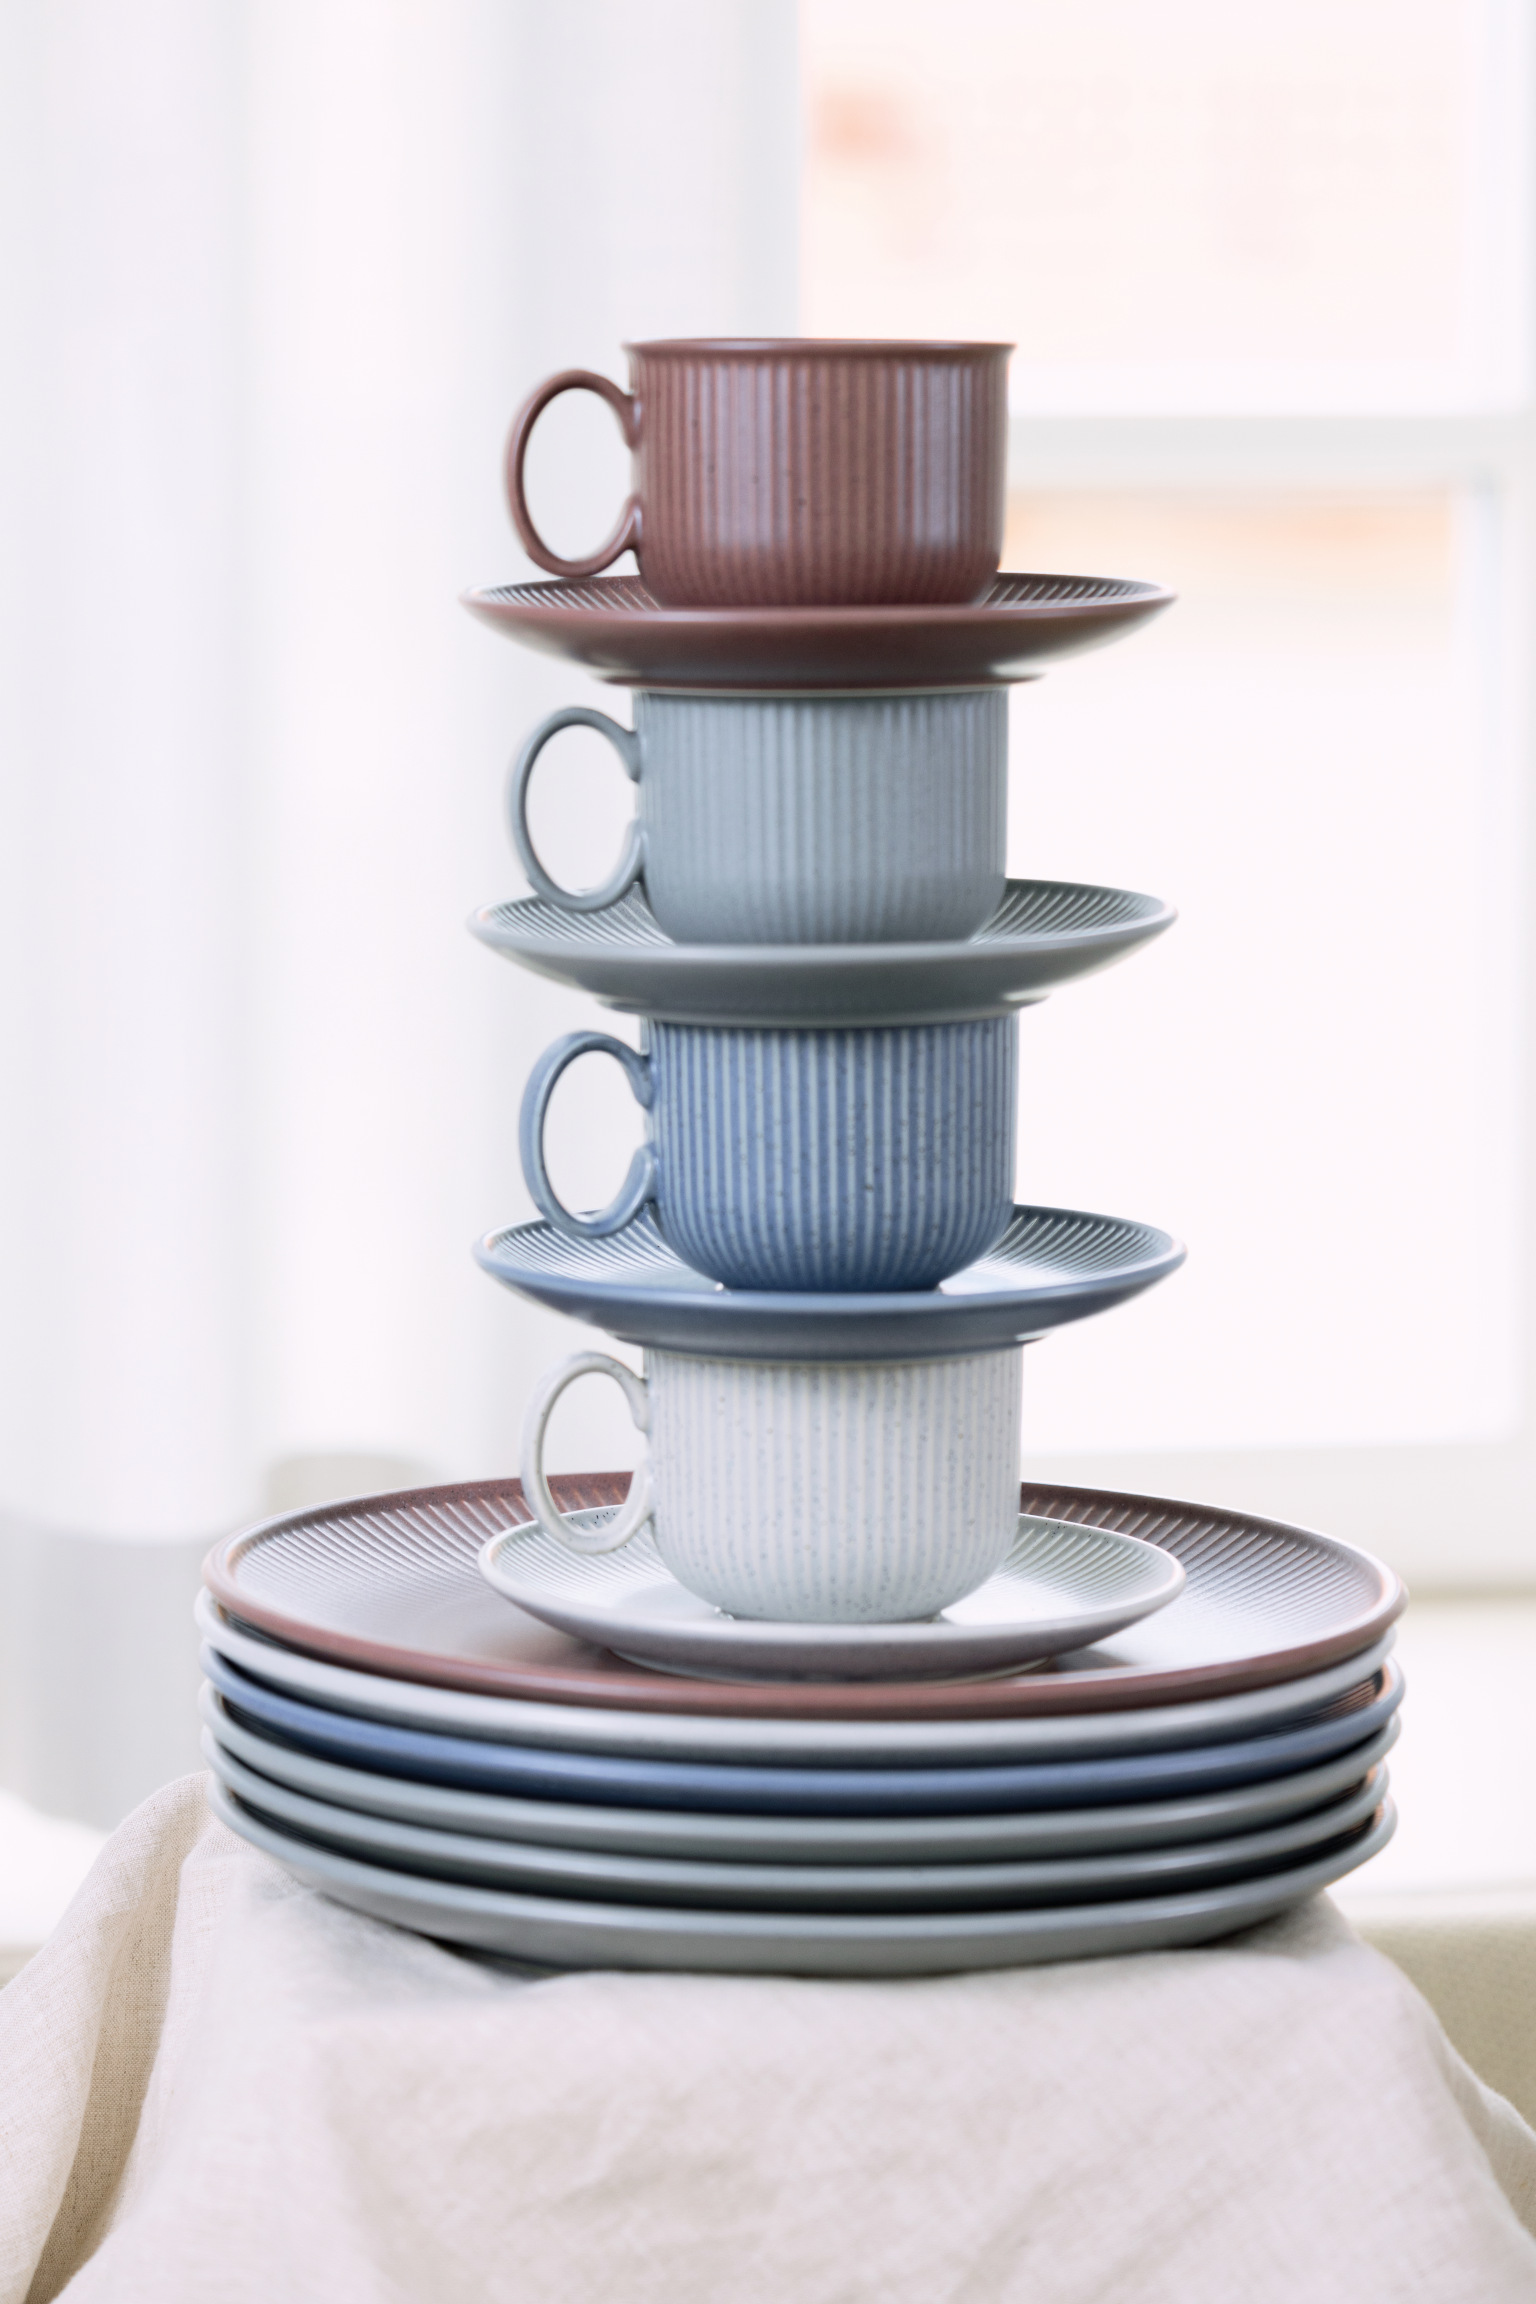 Thomas Clay cups stacked on saucers and stacked plates